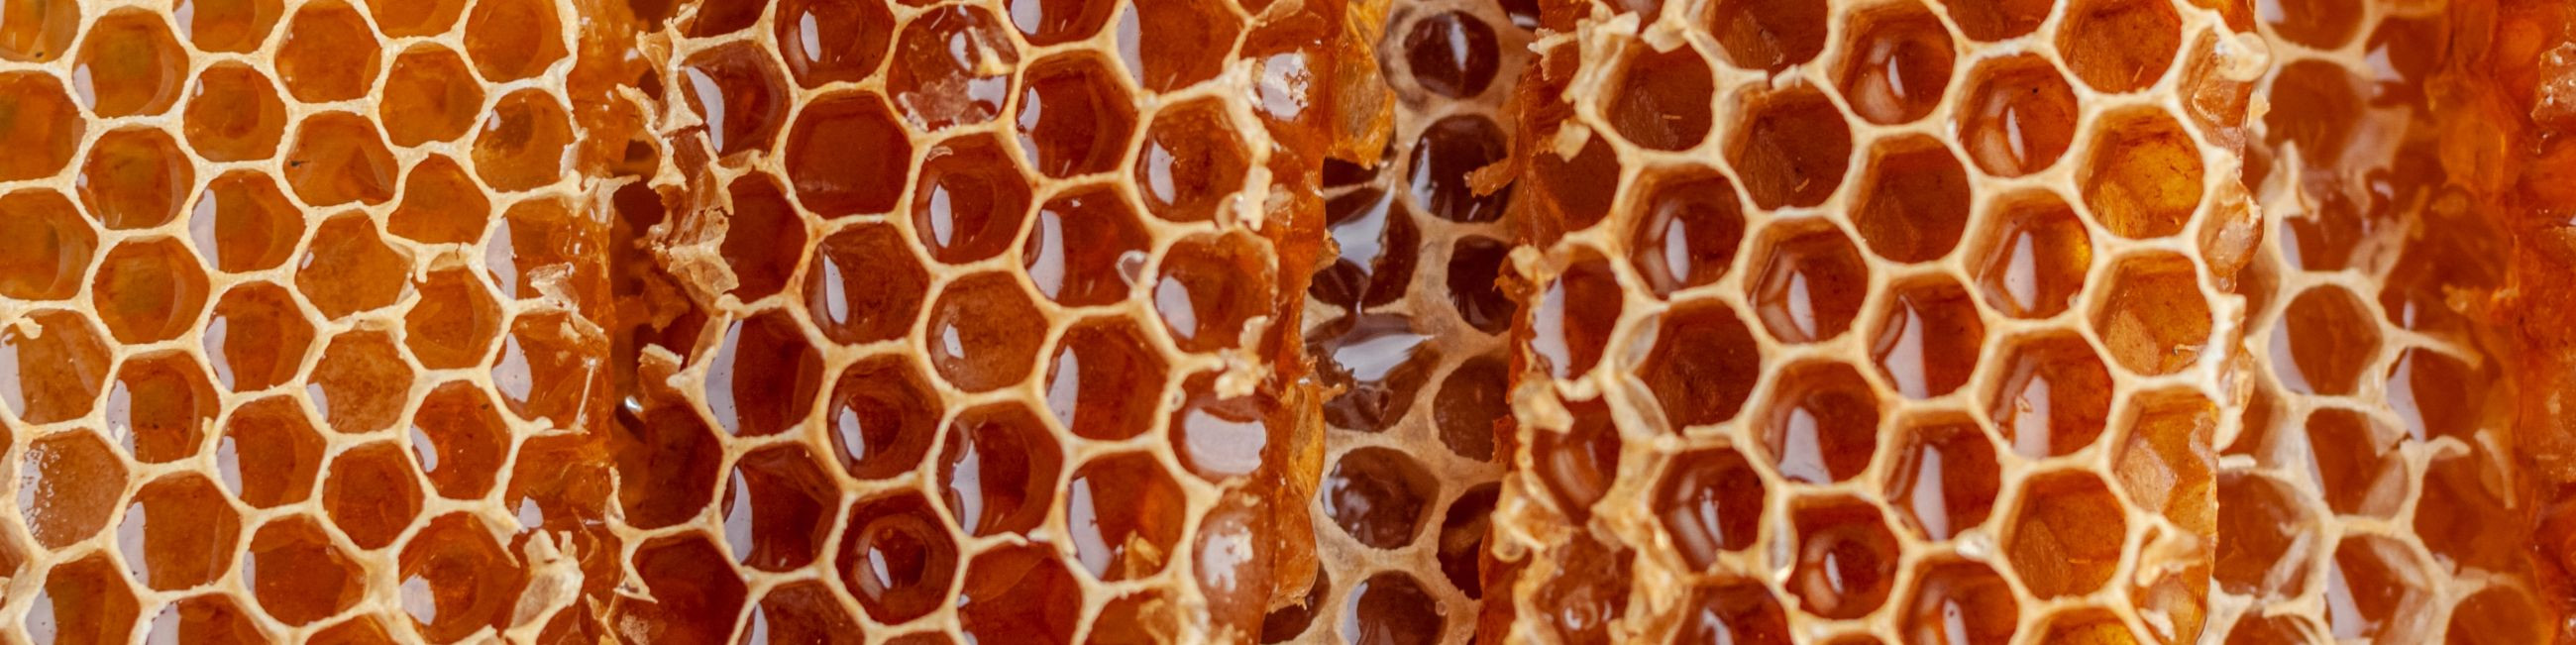 picked in estonia, beewax, honeycomb, traditional practices, nature-friendly activities, sales of bees, bee care, natural, healthy, pure honey